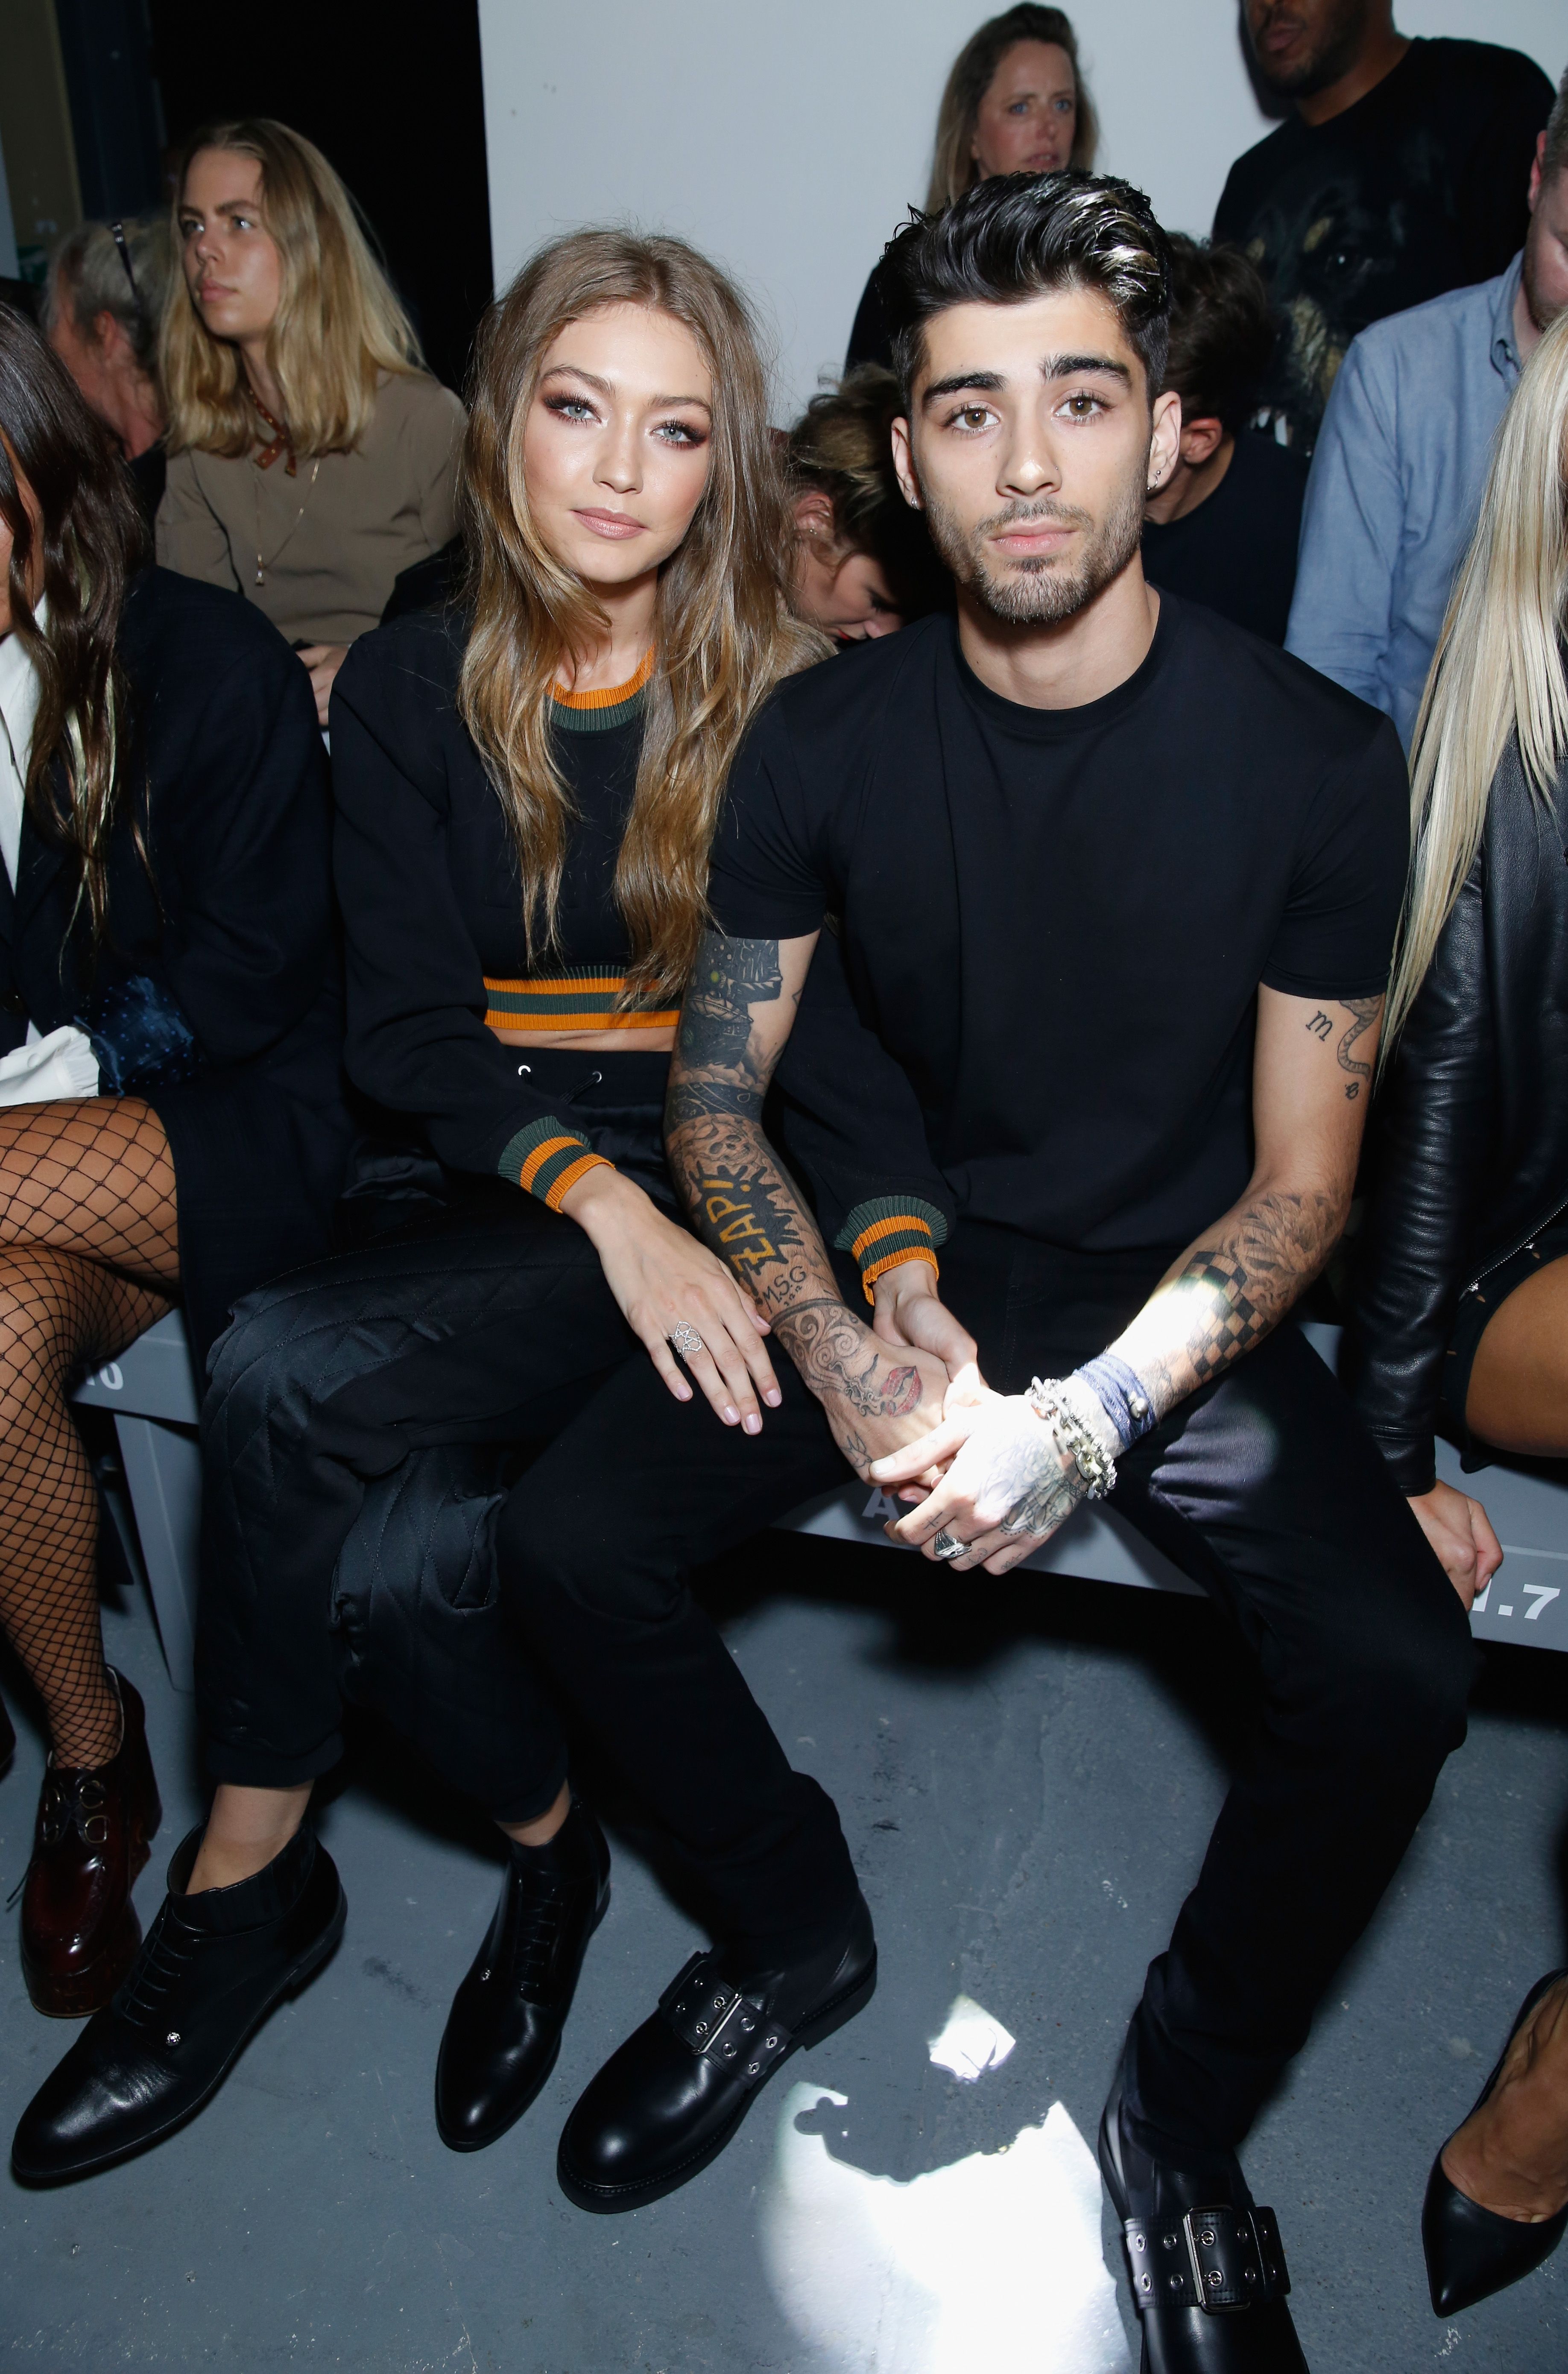 Gigi Hadid Shares Details About Co-Parenting With Zayn Malik